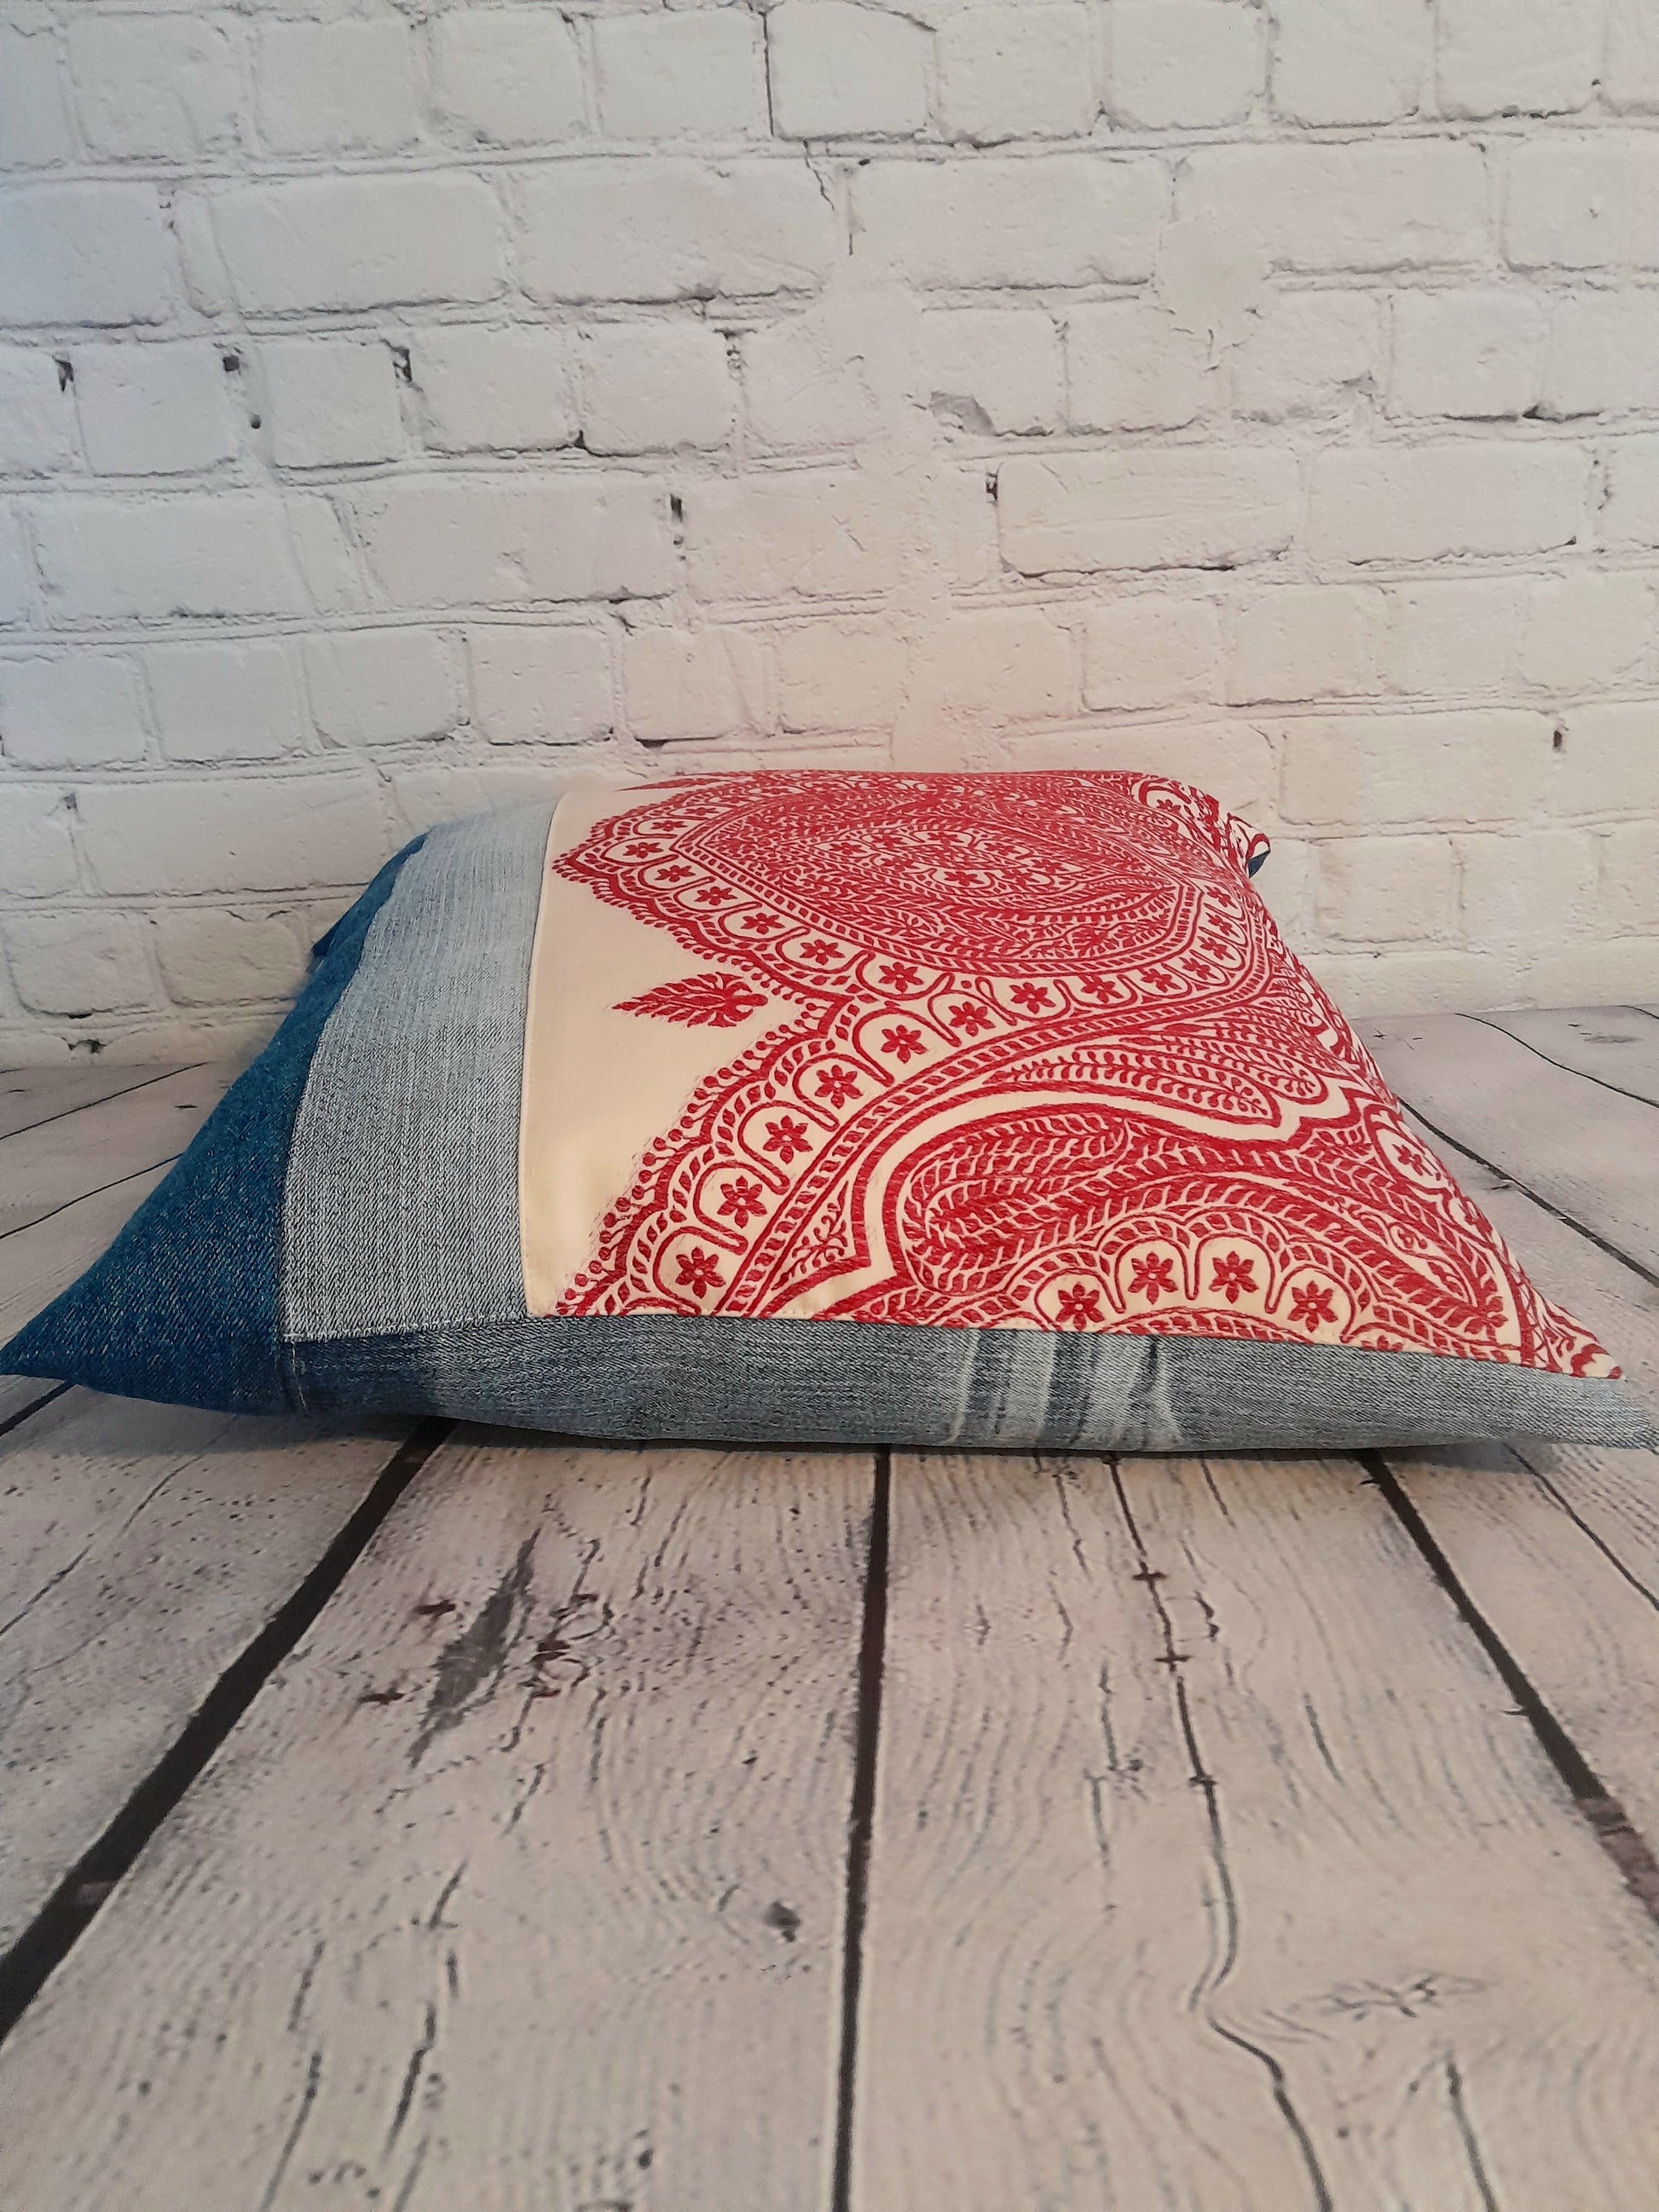 upcycled denim cushion throw pillow red cream and blue home decor.